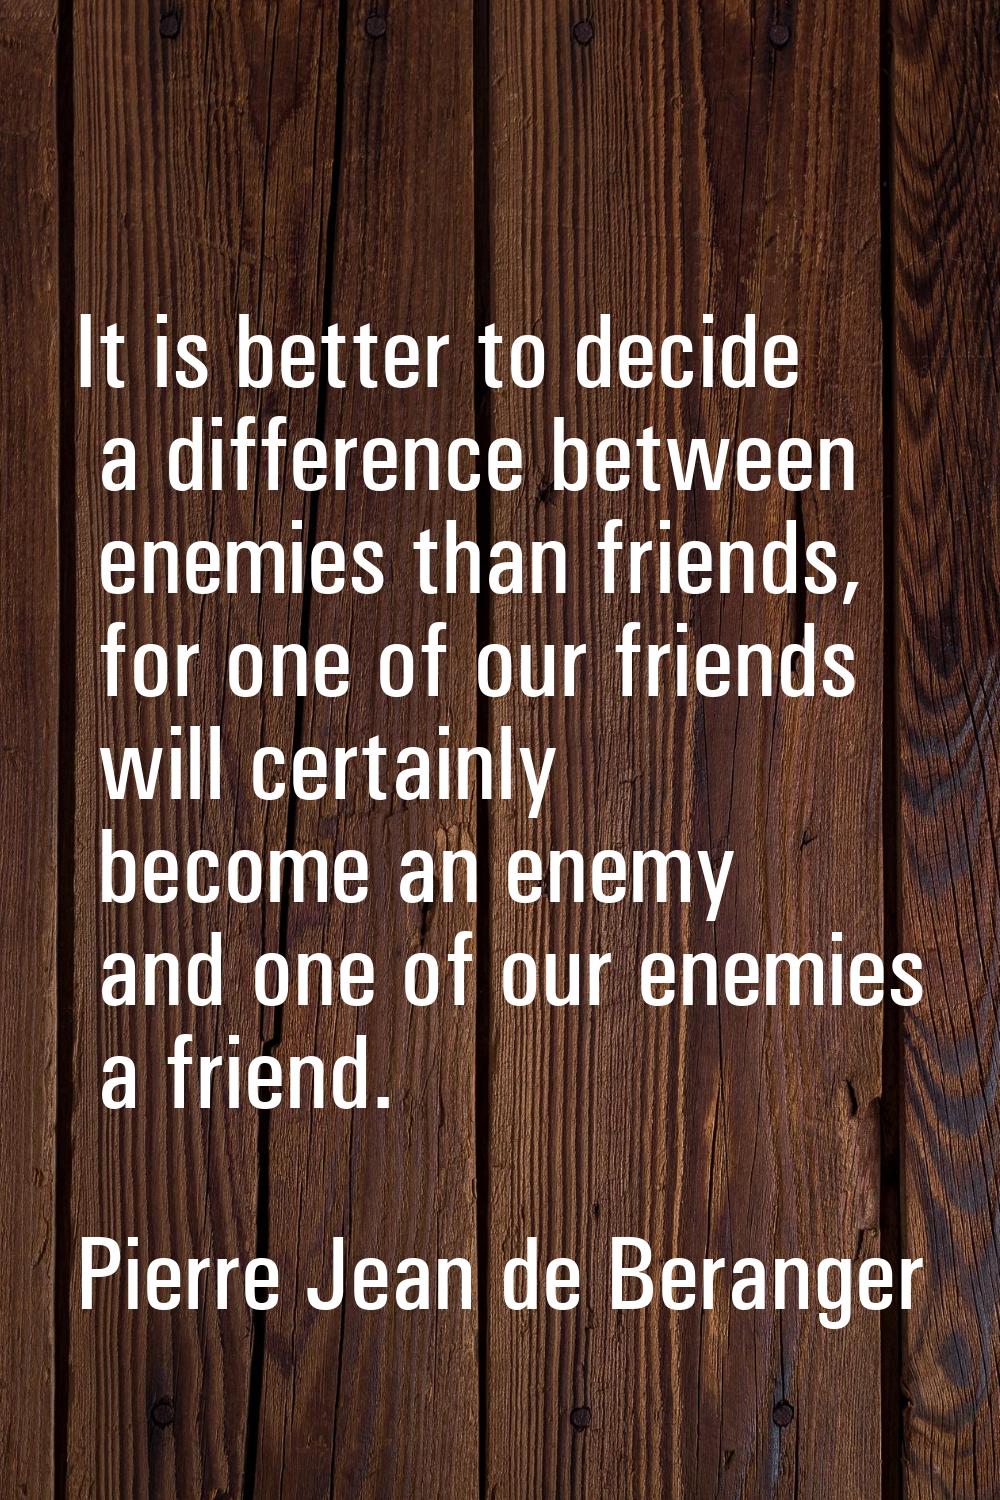 It is better to decide a difference between enemies than friends, for one of our friends will certa